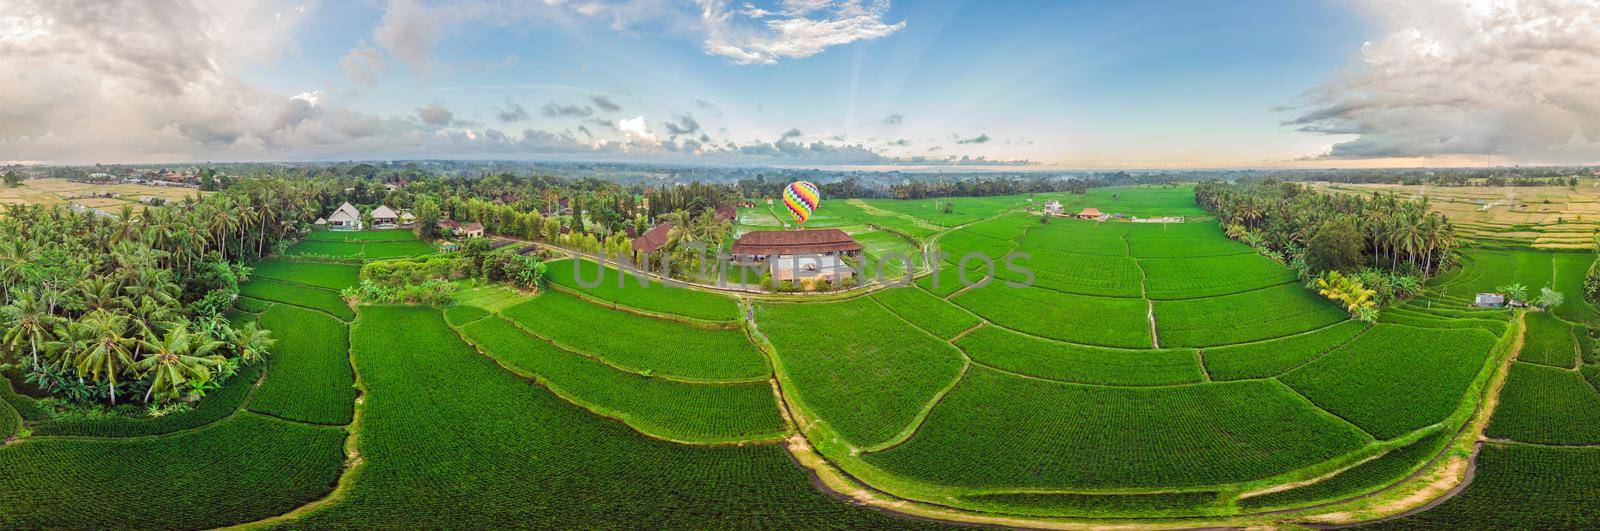 hot air balloon over the green paddy field. Composition of nature and blue sky background. Travel concept by galitskaya